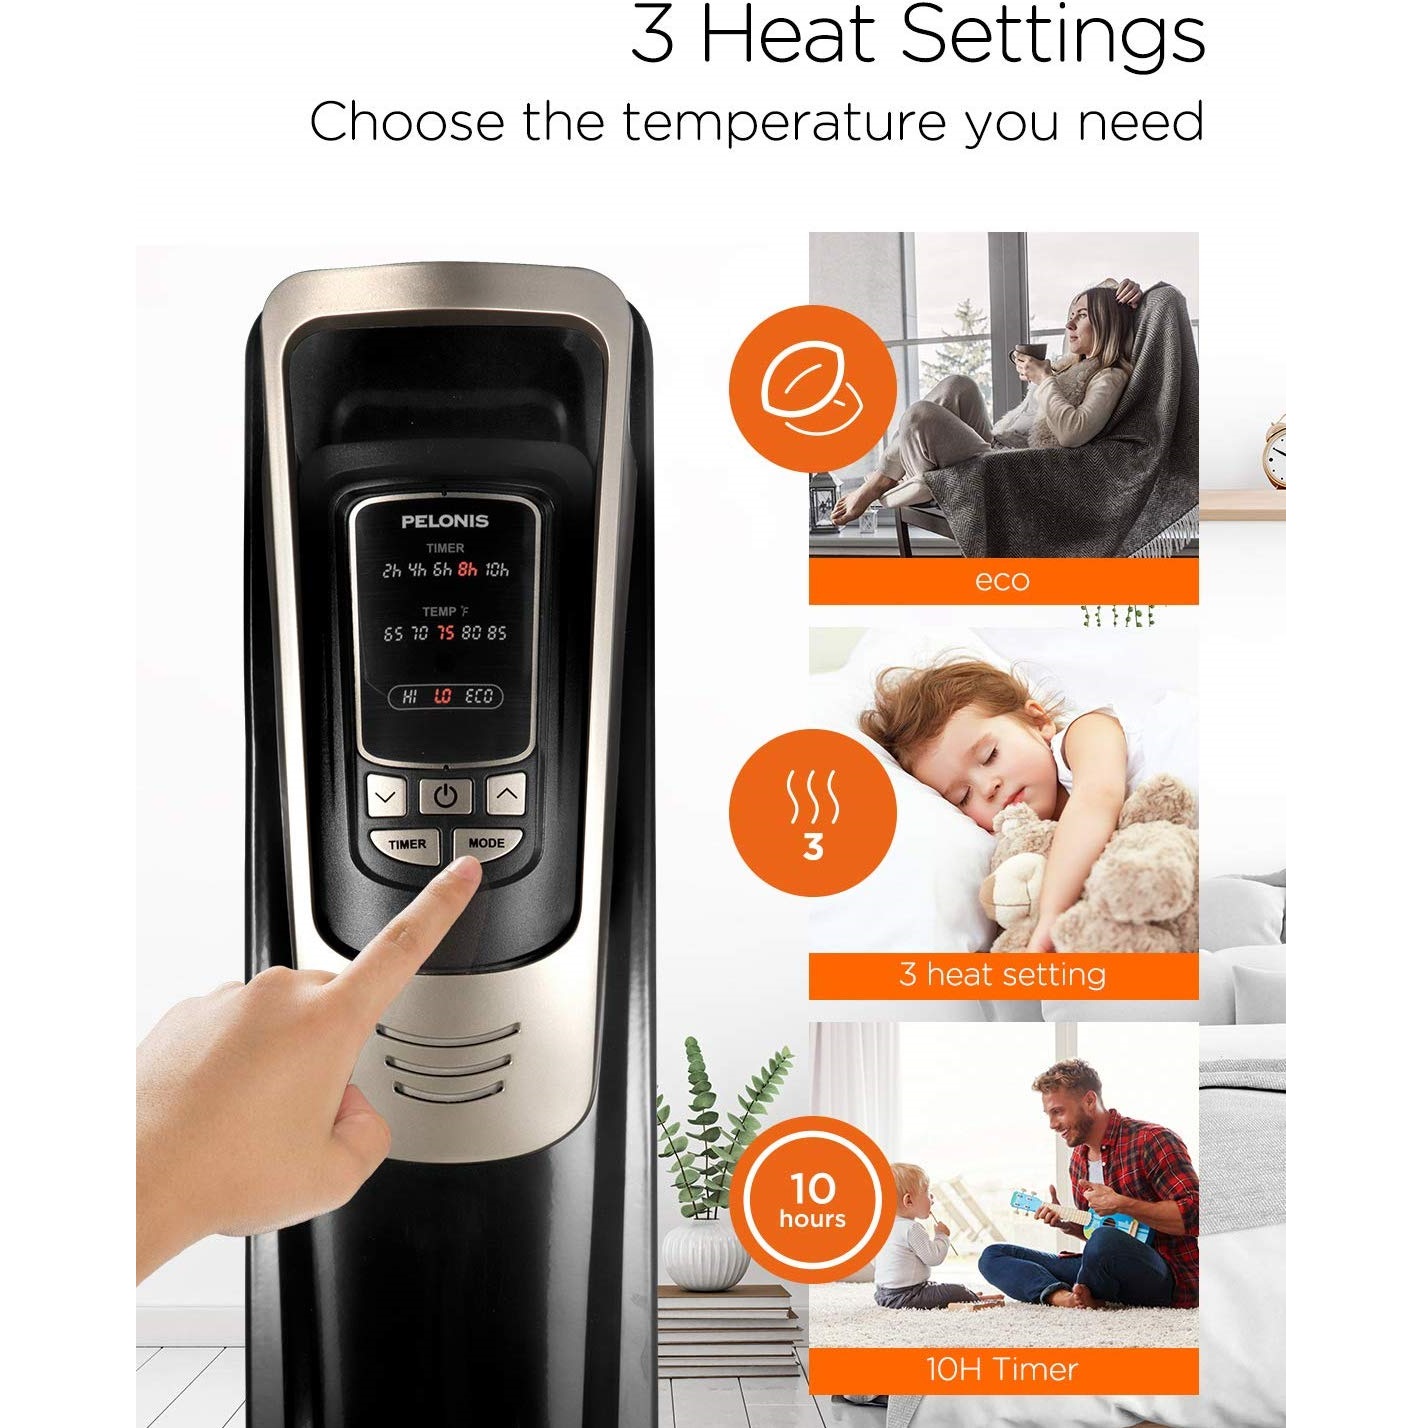 Pelonis Oil Filled Radiator Space Heater with Programmable 